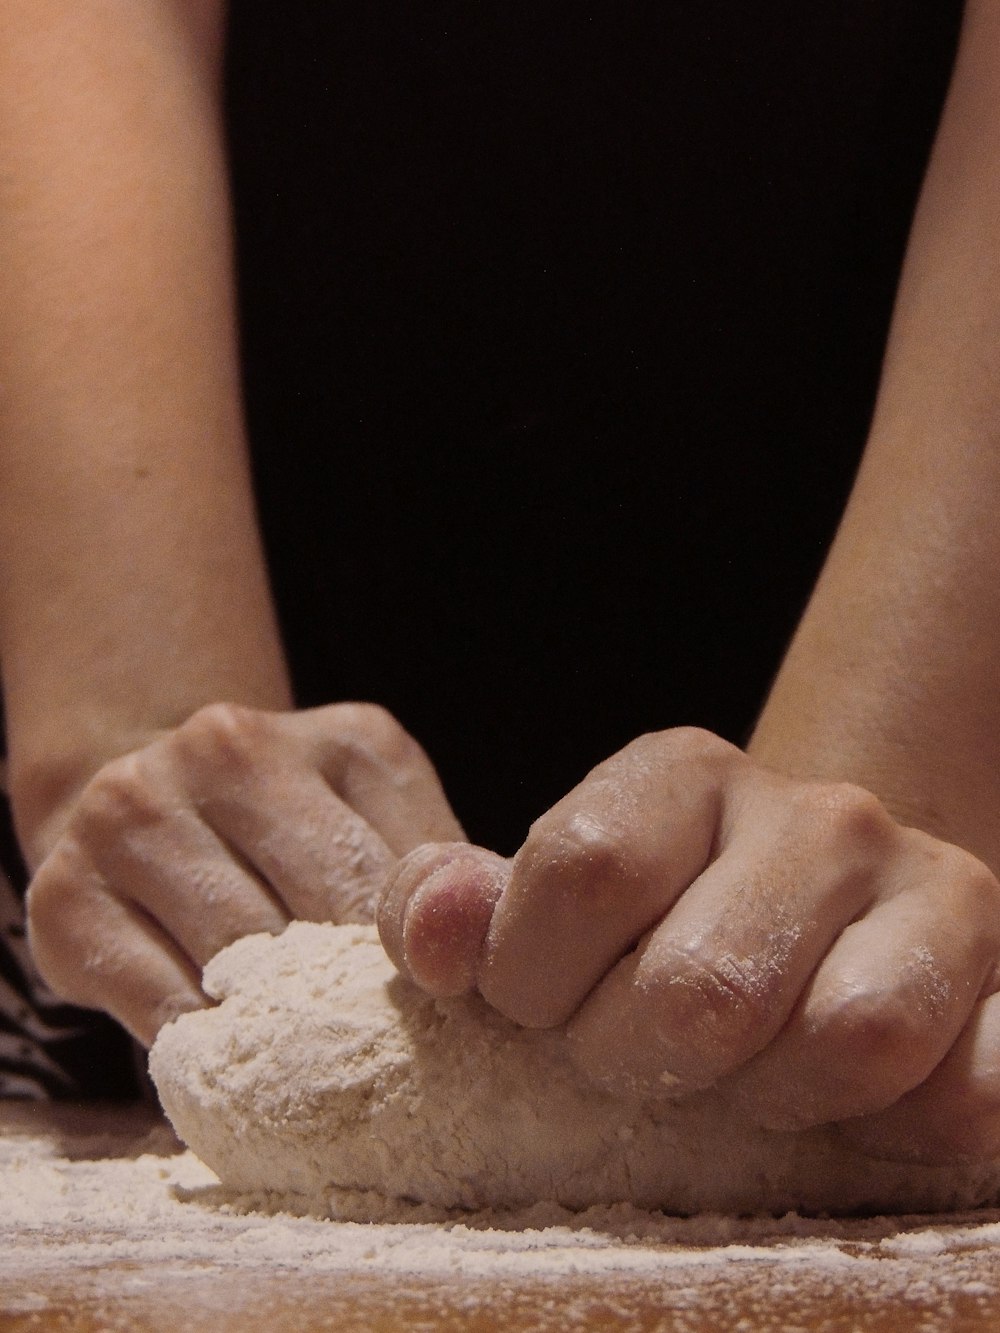 person holding white powder on brown wooden table